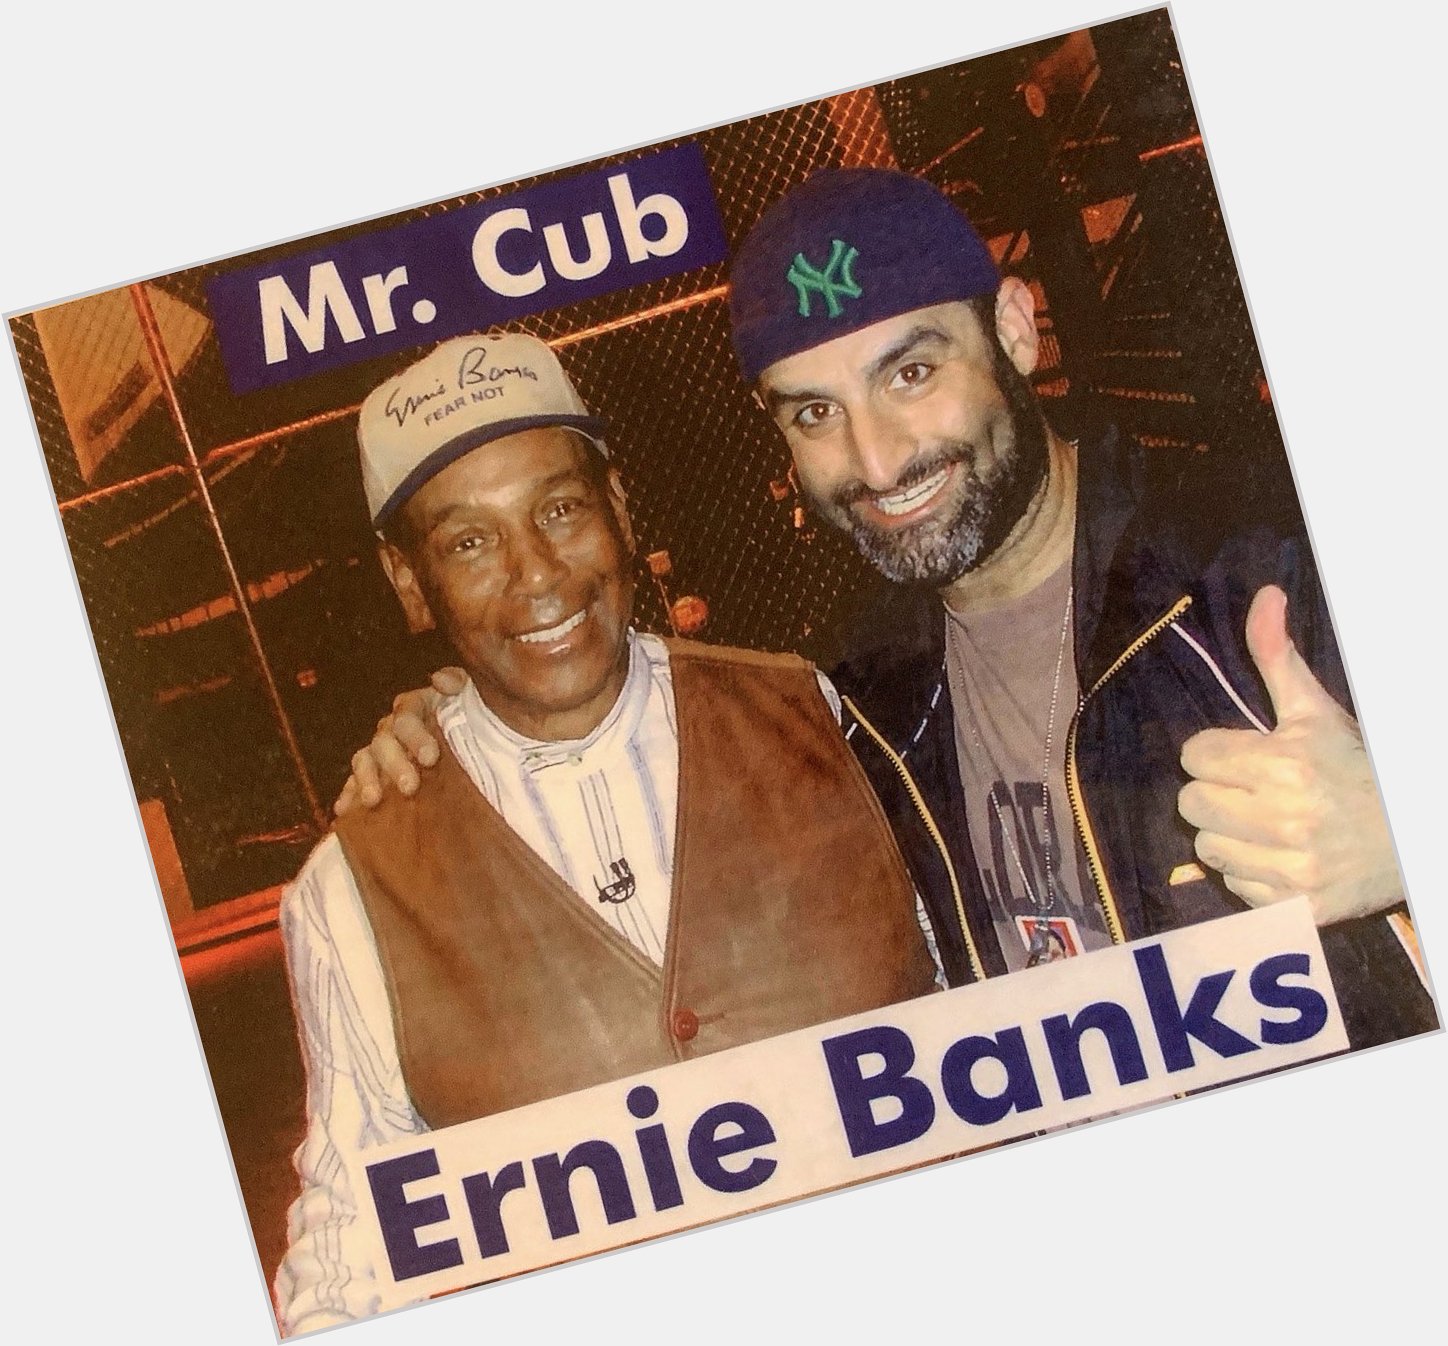 Happy 88th Birthday to the late great Ernie Banks!   